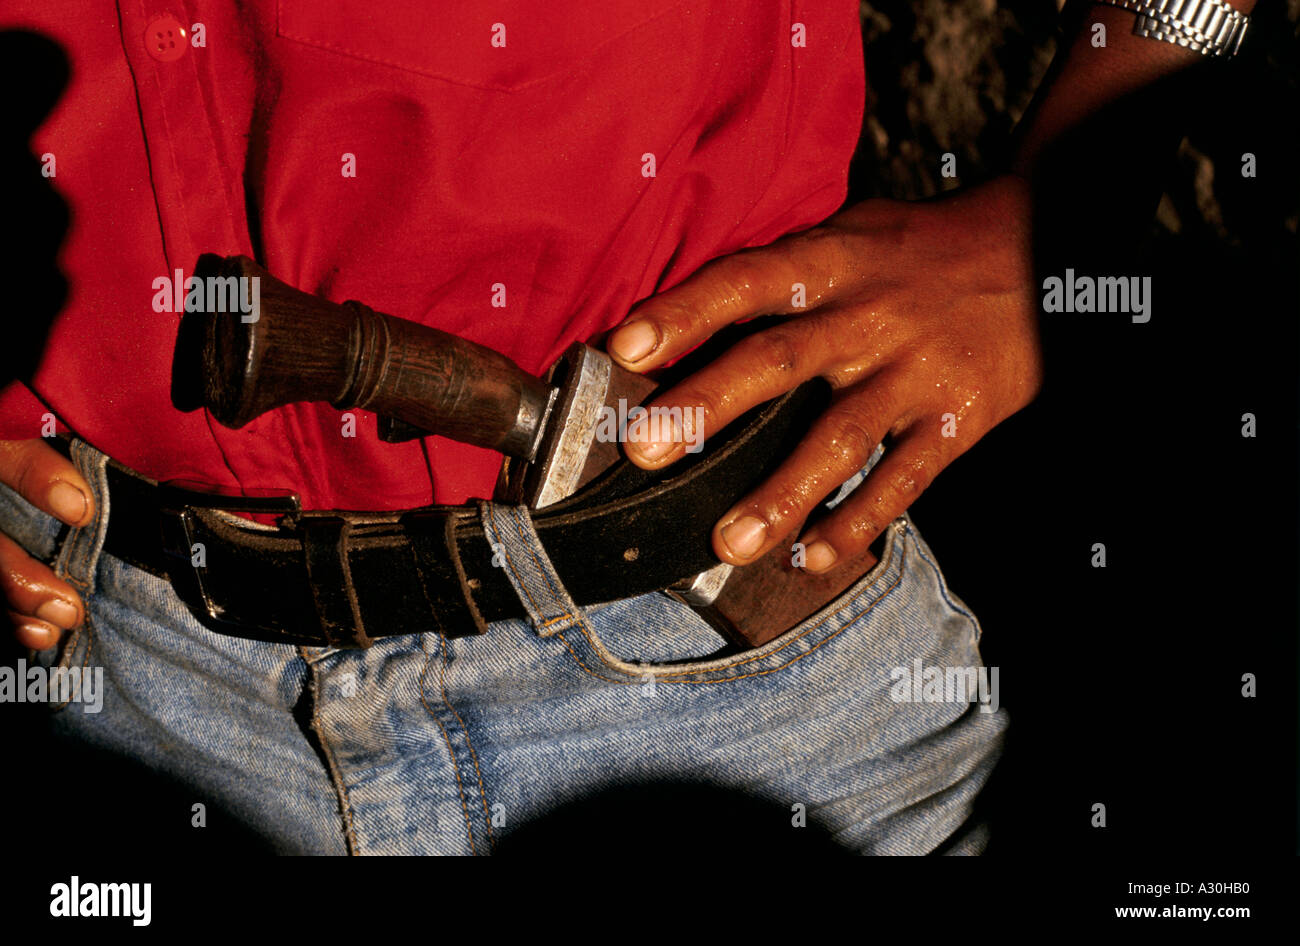 A Maoist rebel cadre in a red shirt with the traditional kukri knife native in the waistband of his jeans. Dolakha, Nepal Stock Photo